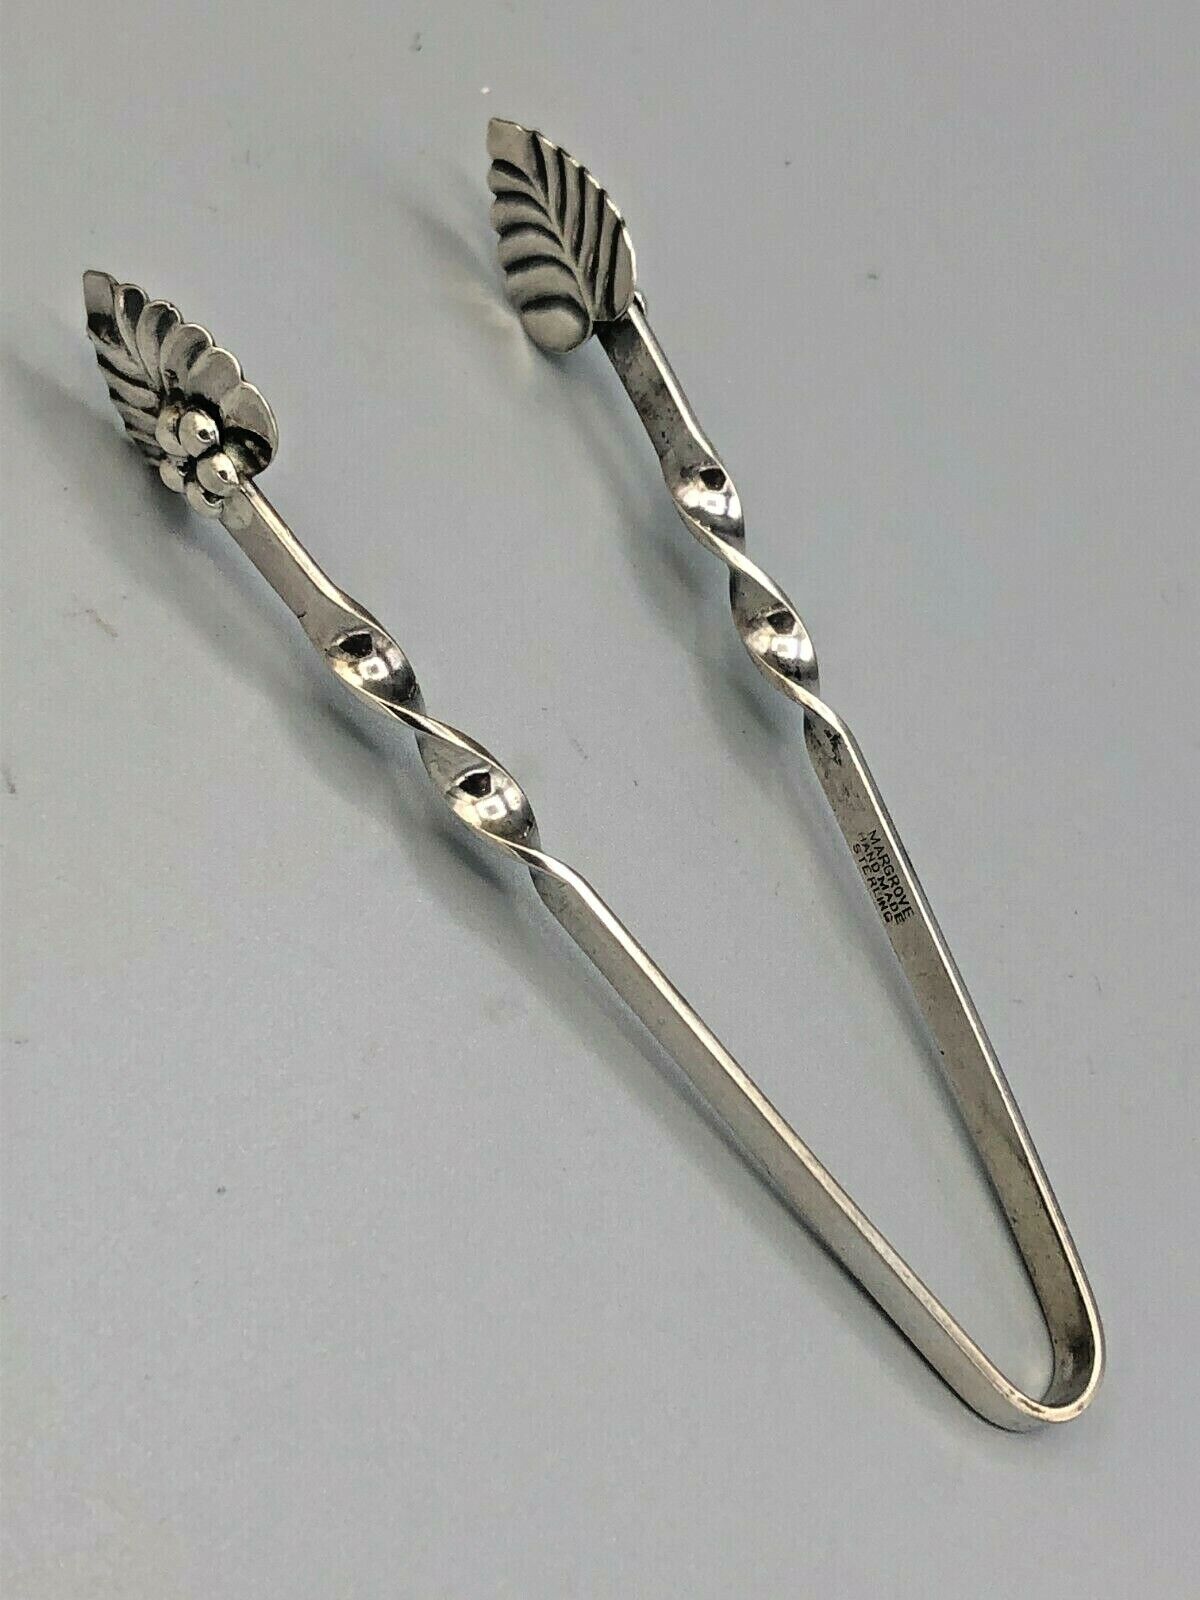 Vintage hand made Sterling Silver Sugar Tongs by Margrove